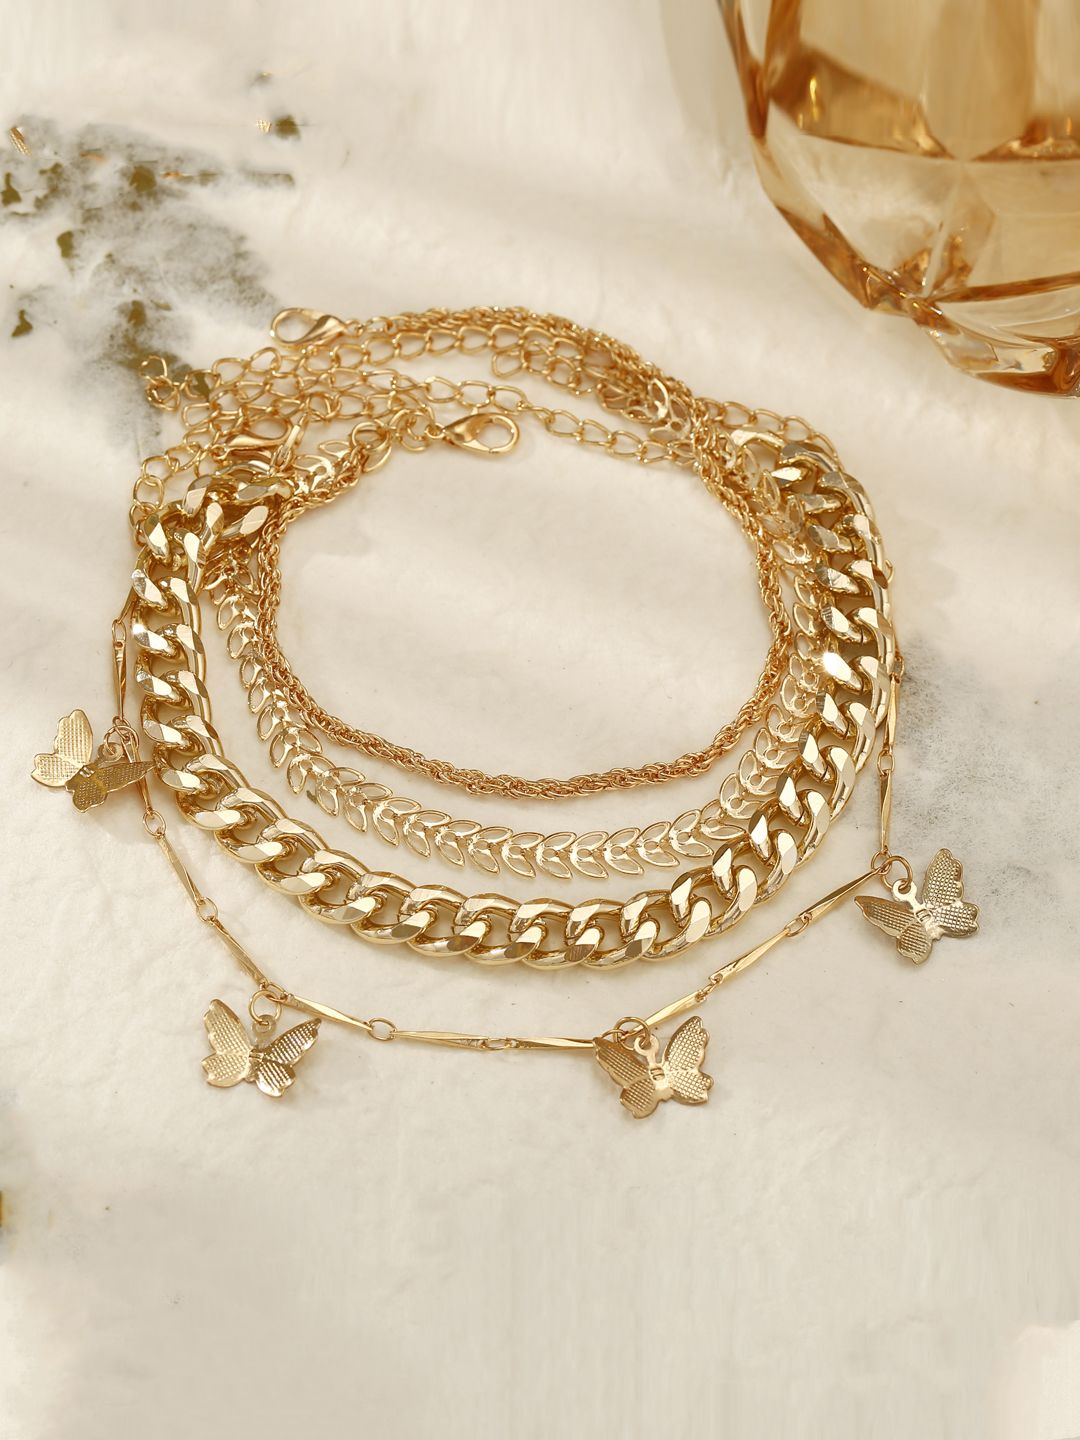 Jewels Galaxy Set of 4 Gold-Plated Bracelets Price in India